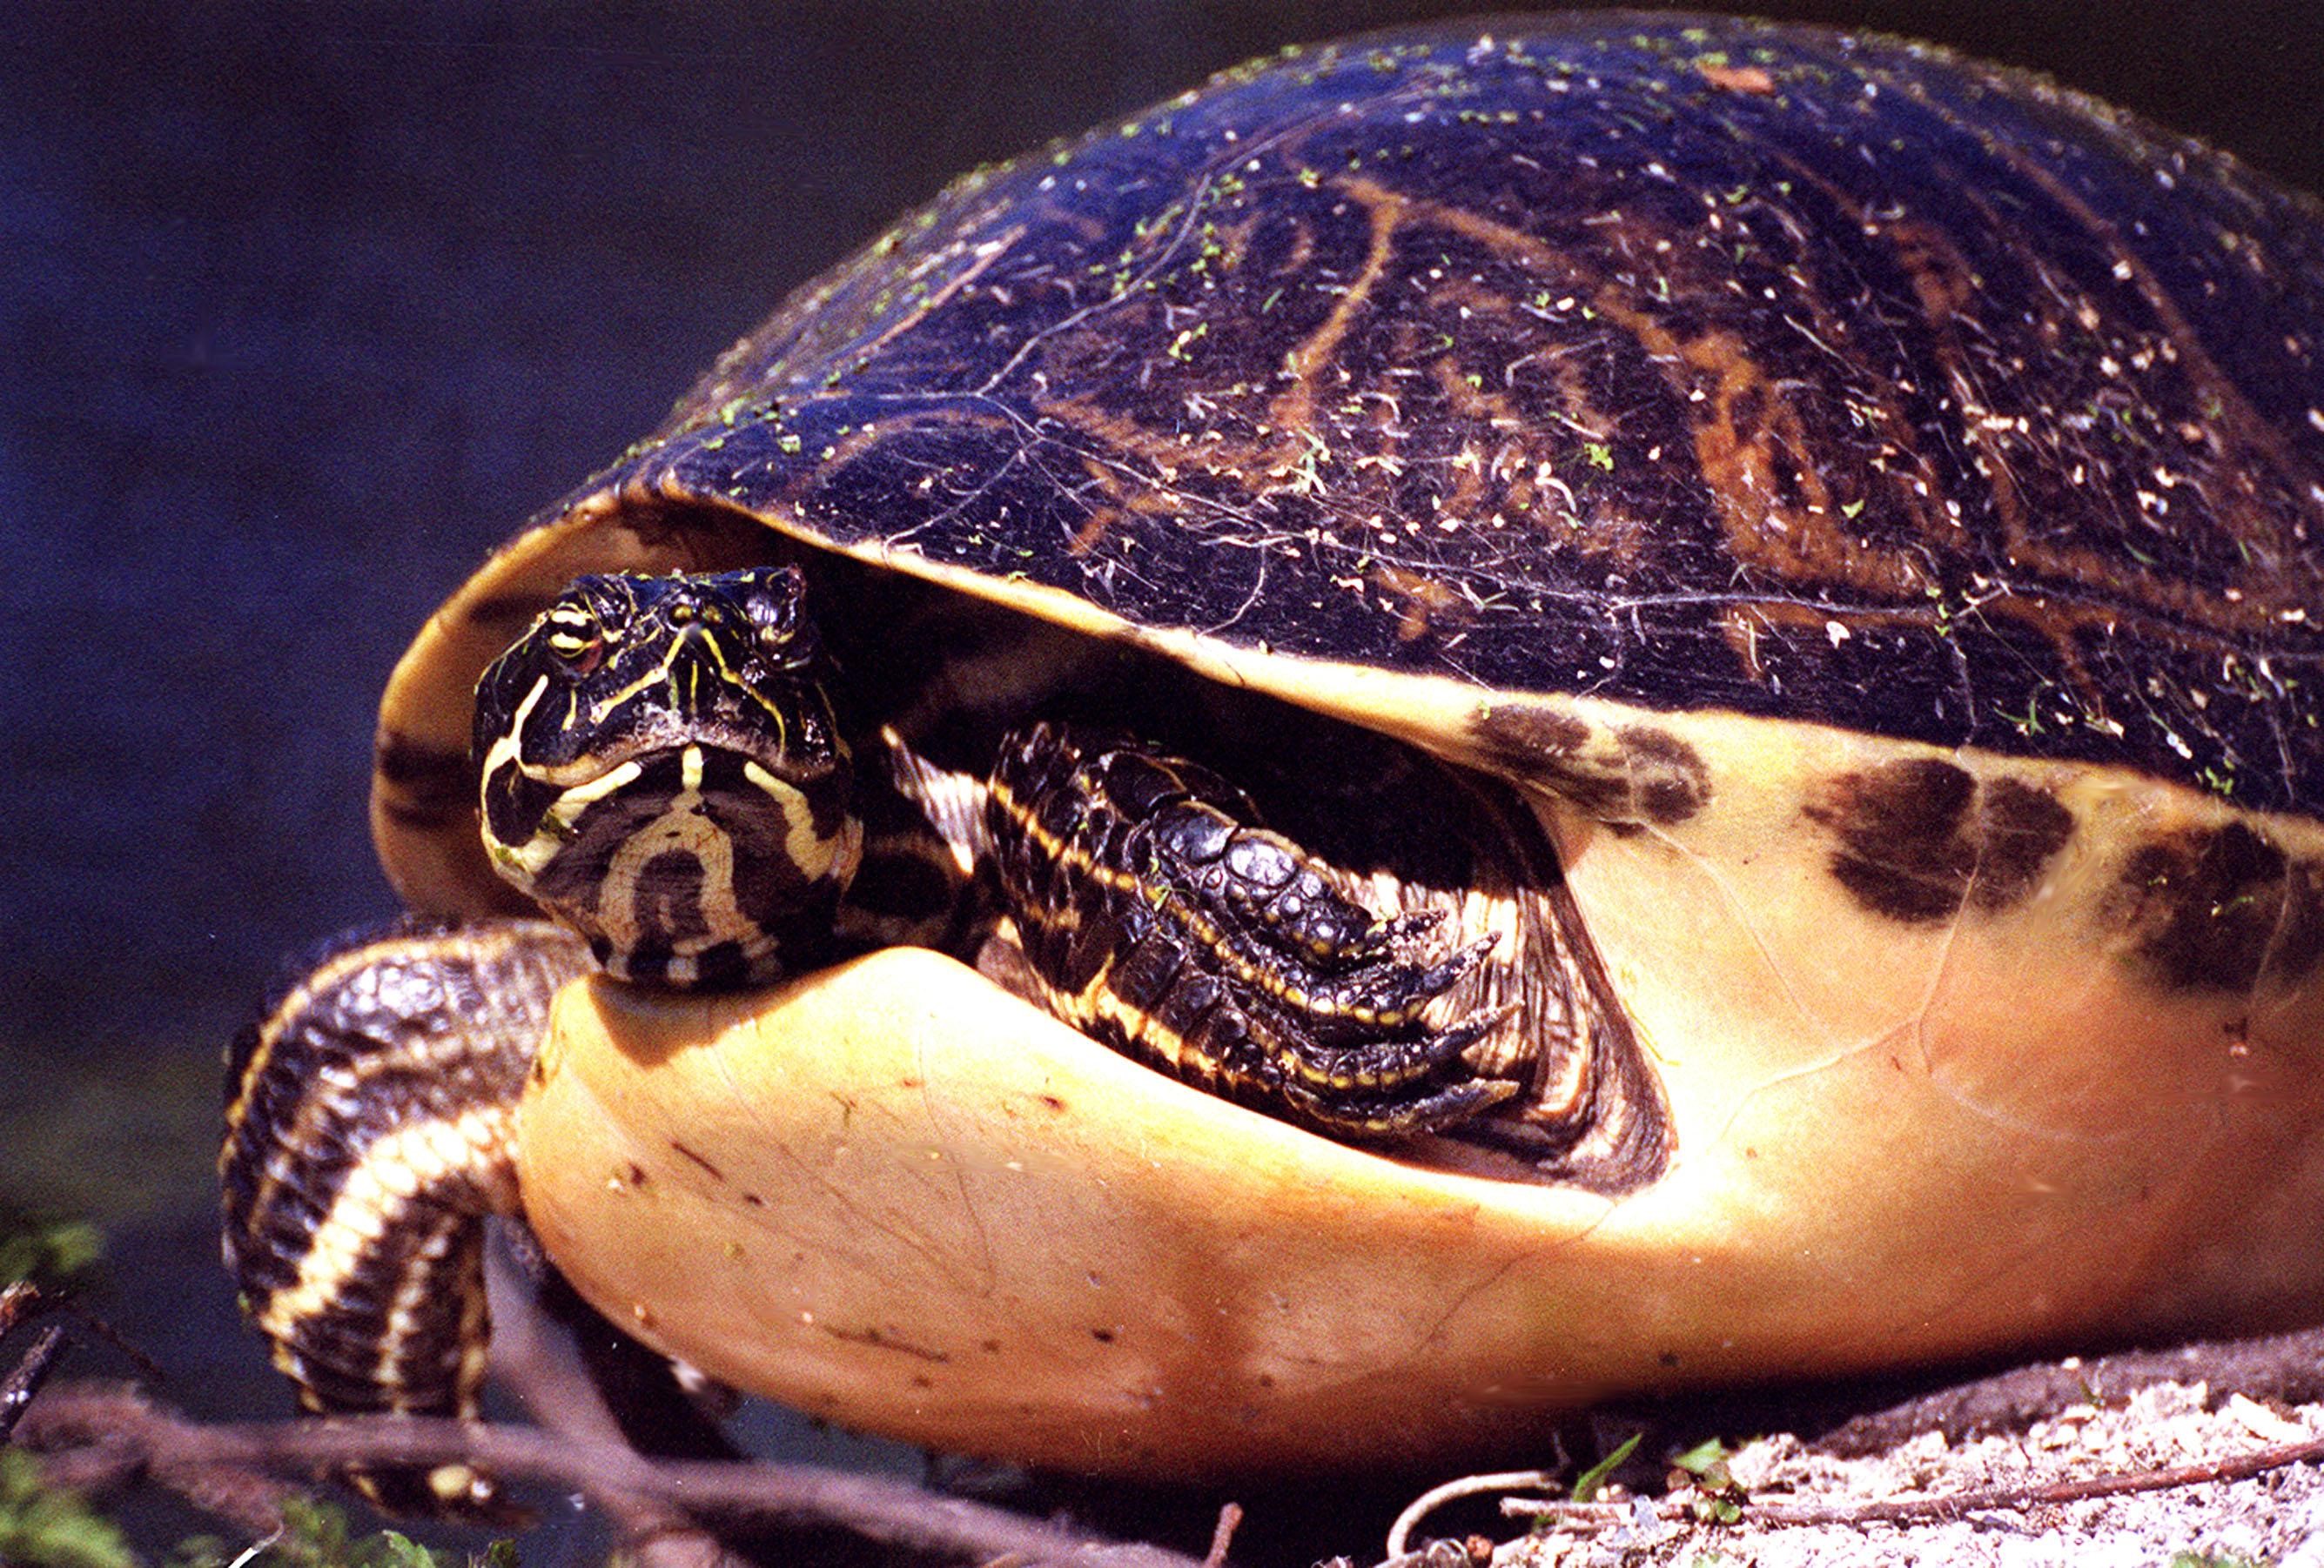 A Florida redbelly turtle looks to its left, directly at the camera. The turtle takes up most of the image. Its head and body peek out from its shell. The top of the shell is dark brown with lighter brown patterns; the underside is a pale tan-yellow. There are small pieces of vegetation stuck to the top of the turtle's shell.